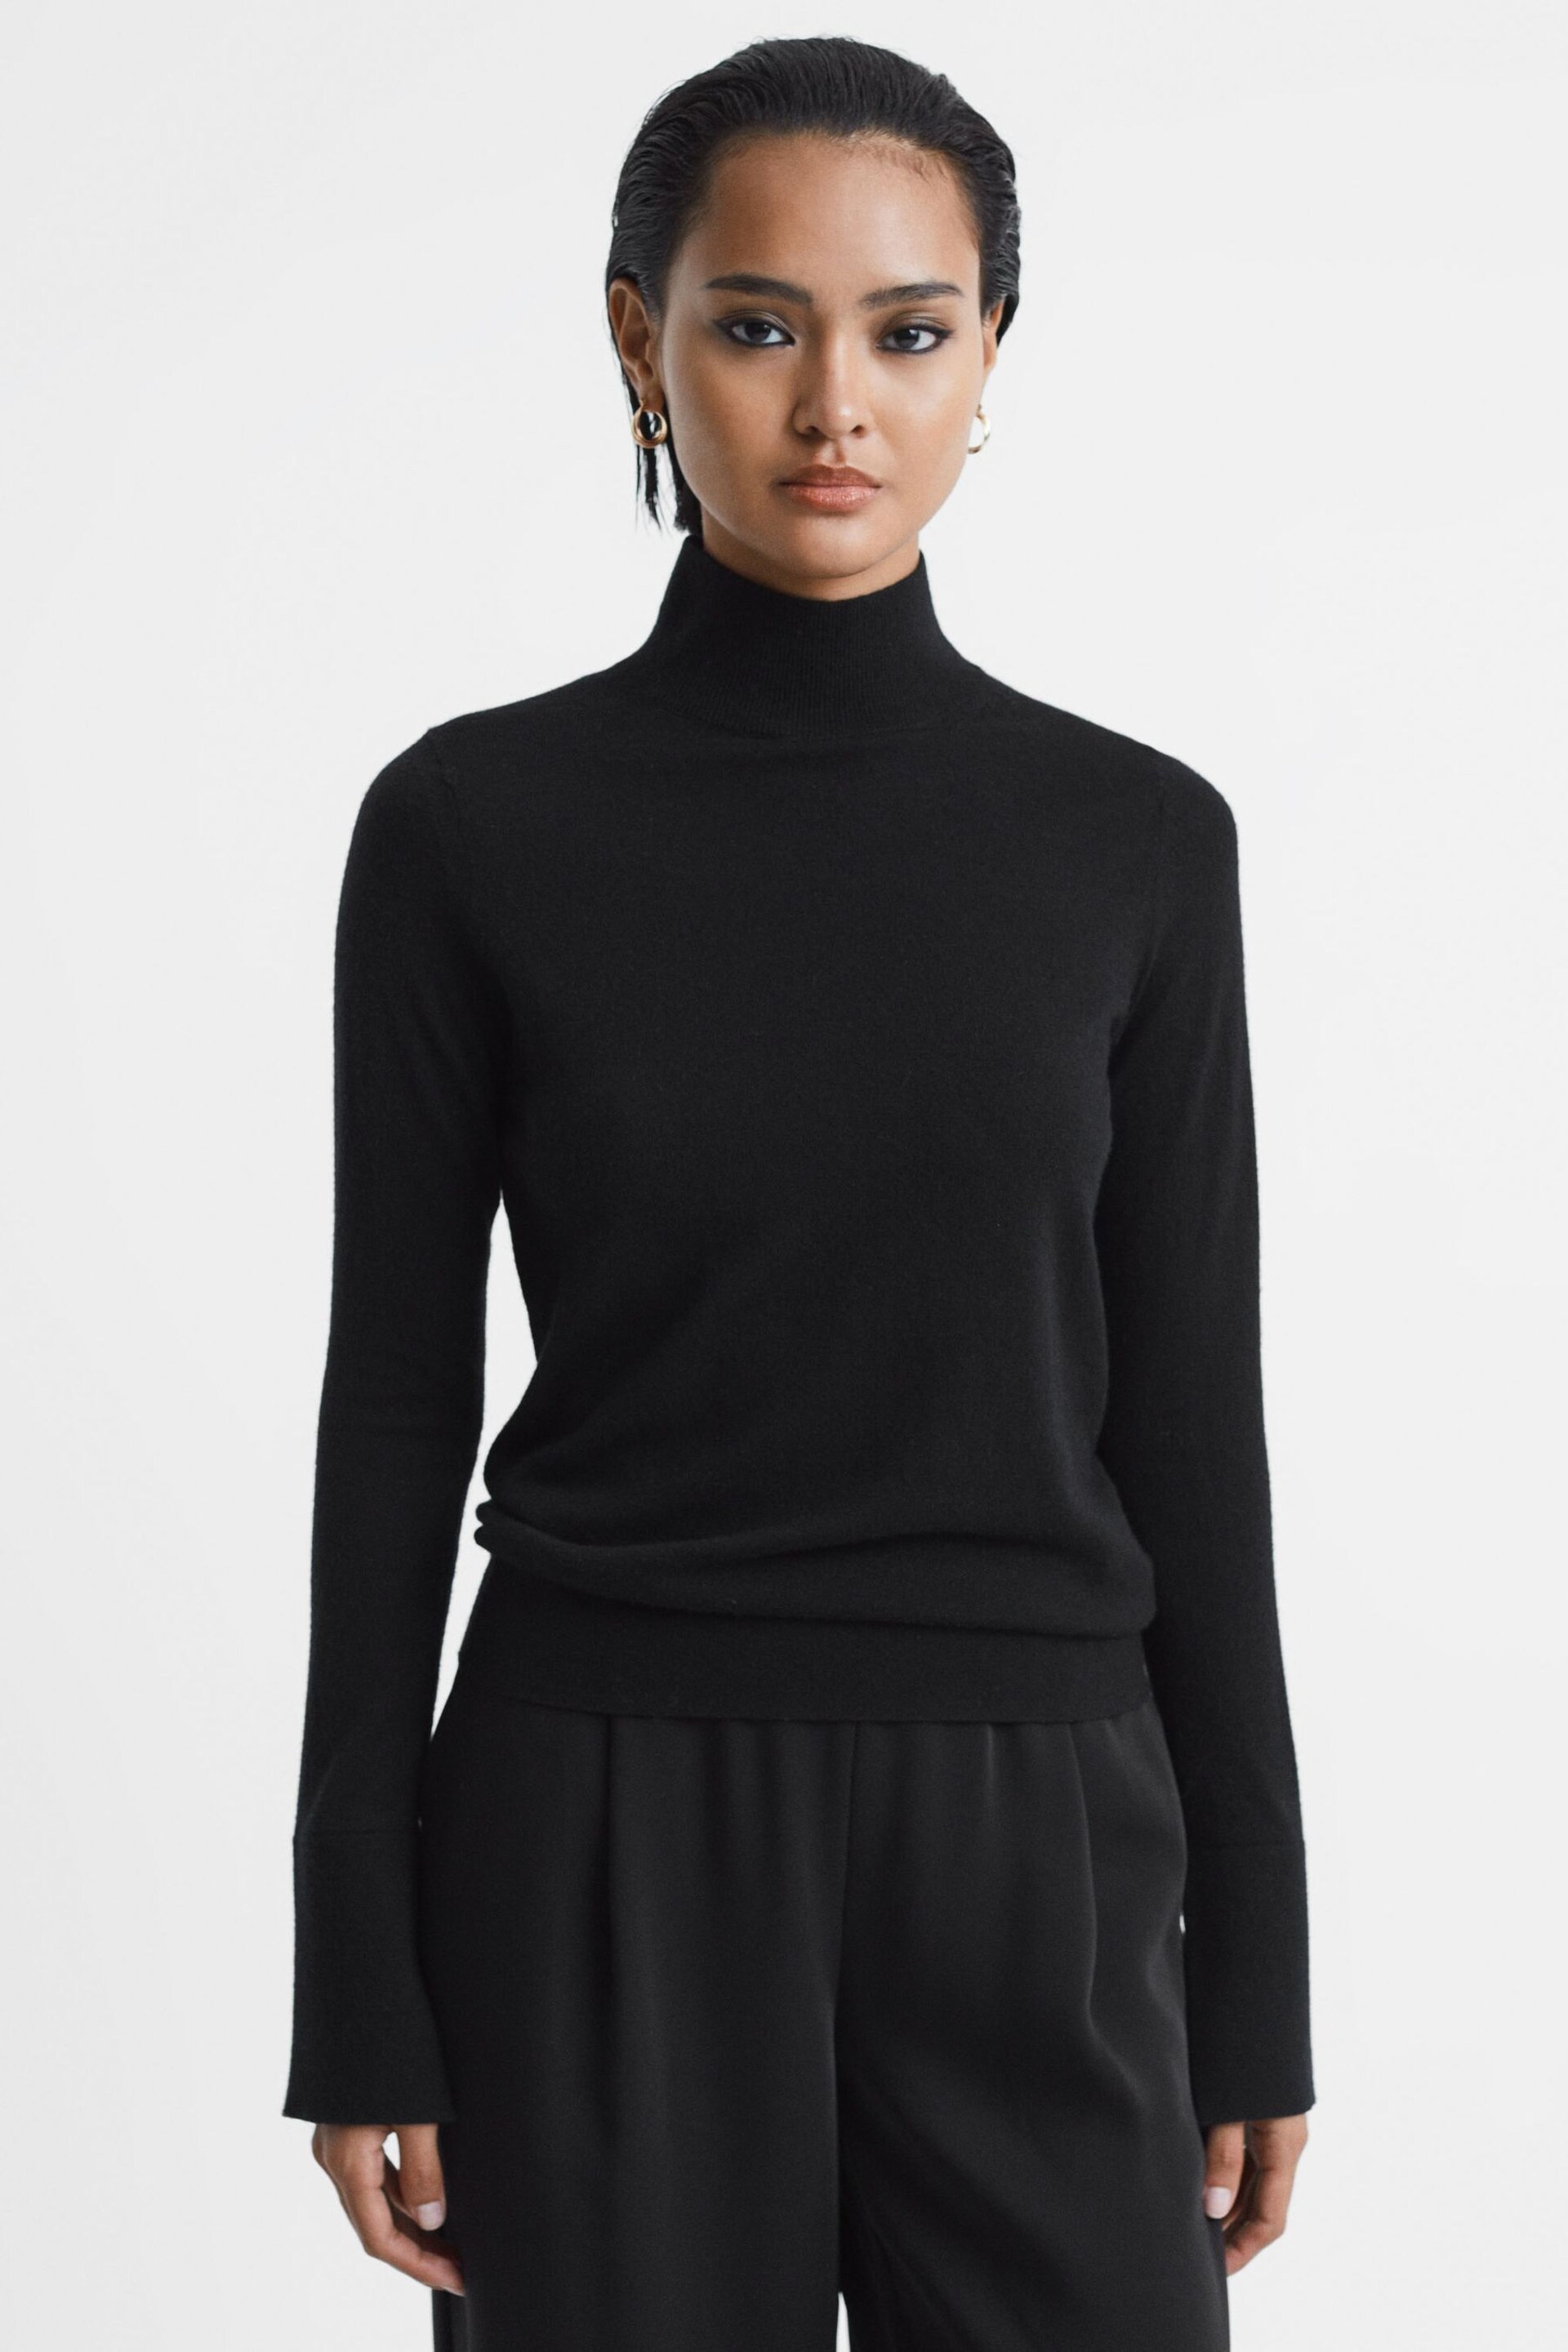 Reiss Black Kylie Merino Wool Fitted Funnel Neck Top - Image 1 of 5